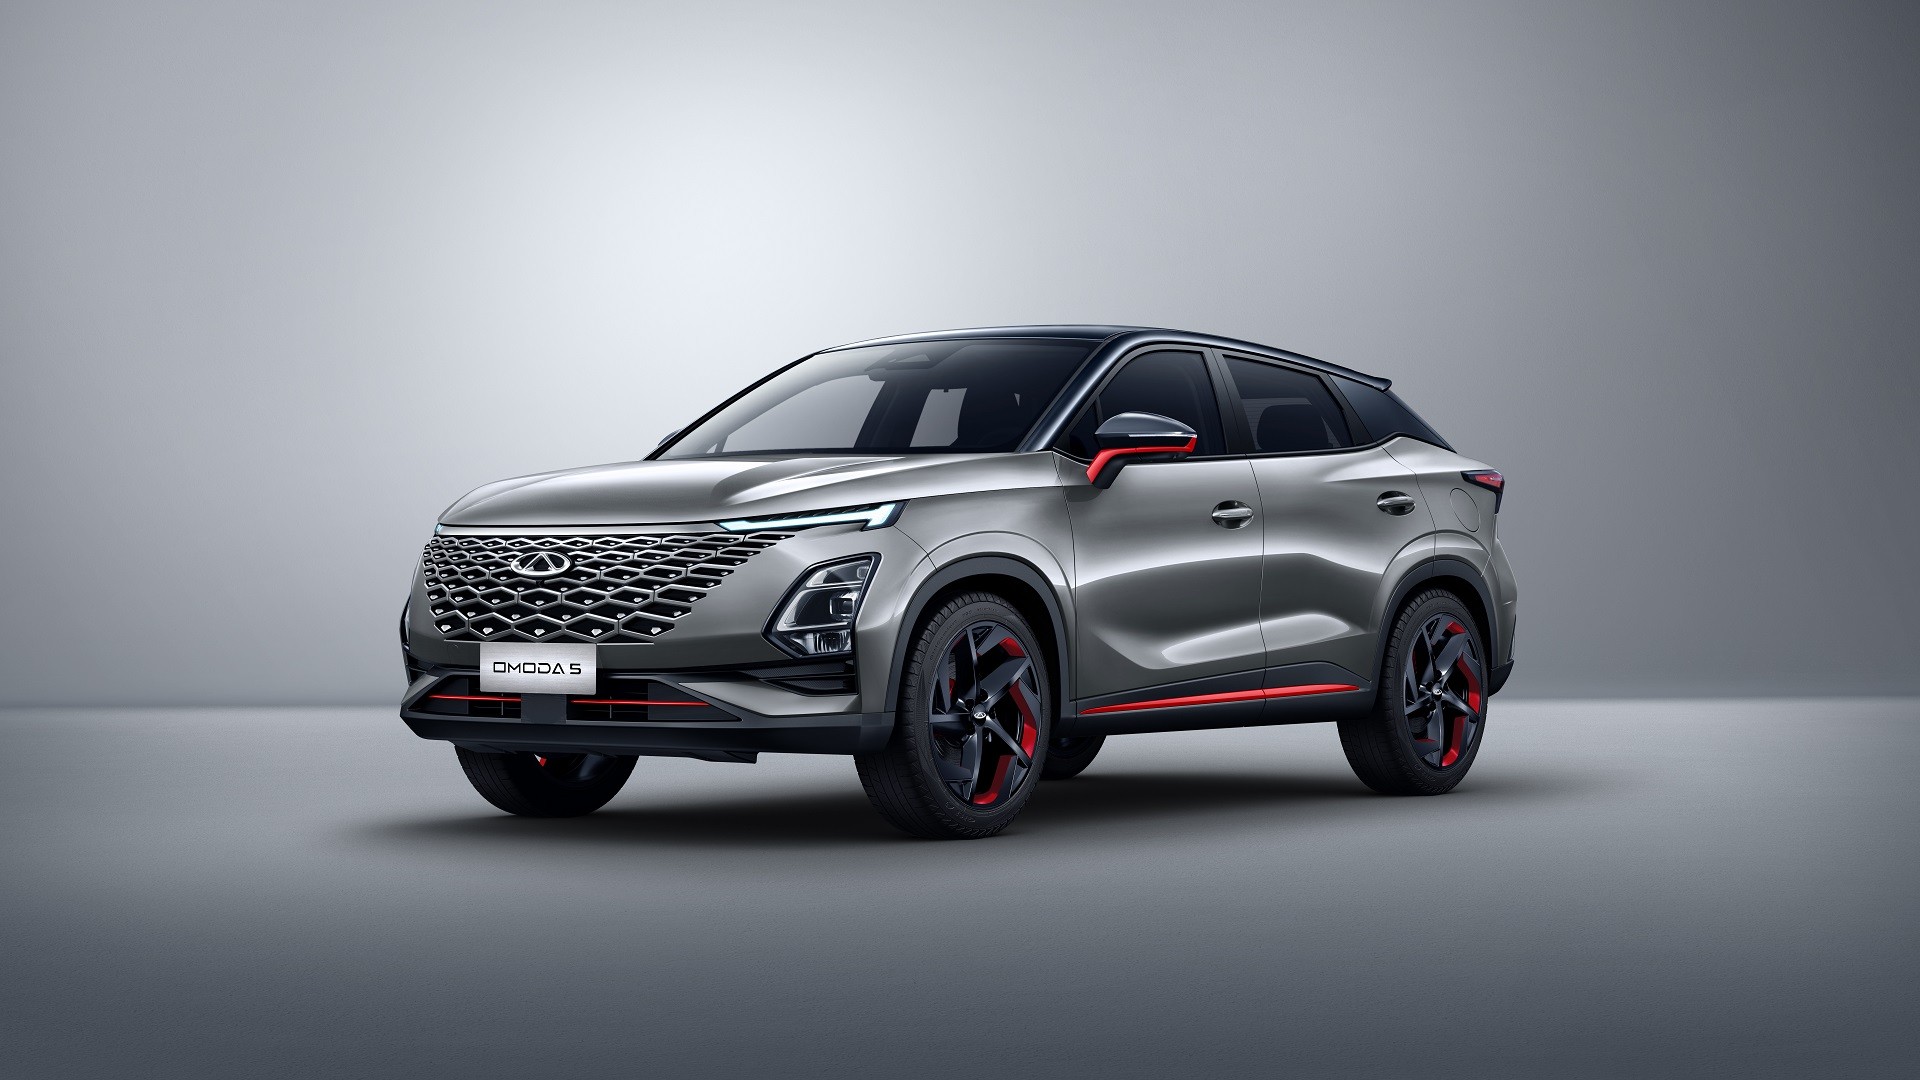 chery omoda 5 will debut in the uk as one of the cheapest crossovers 3